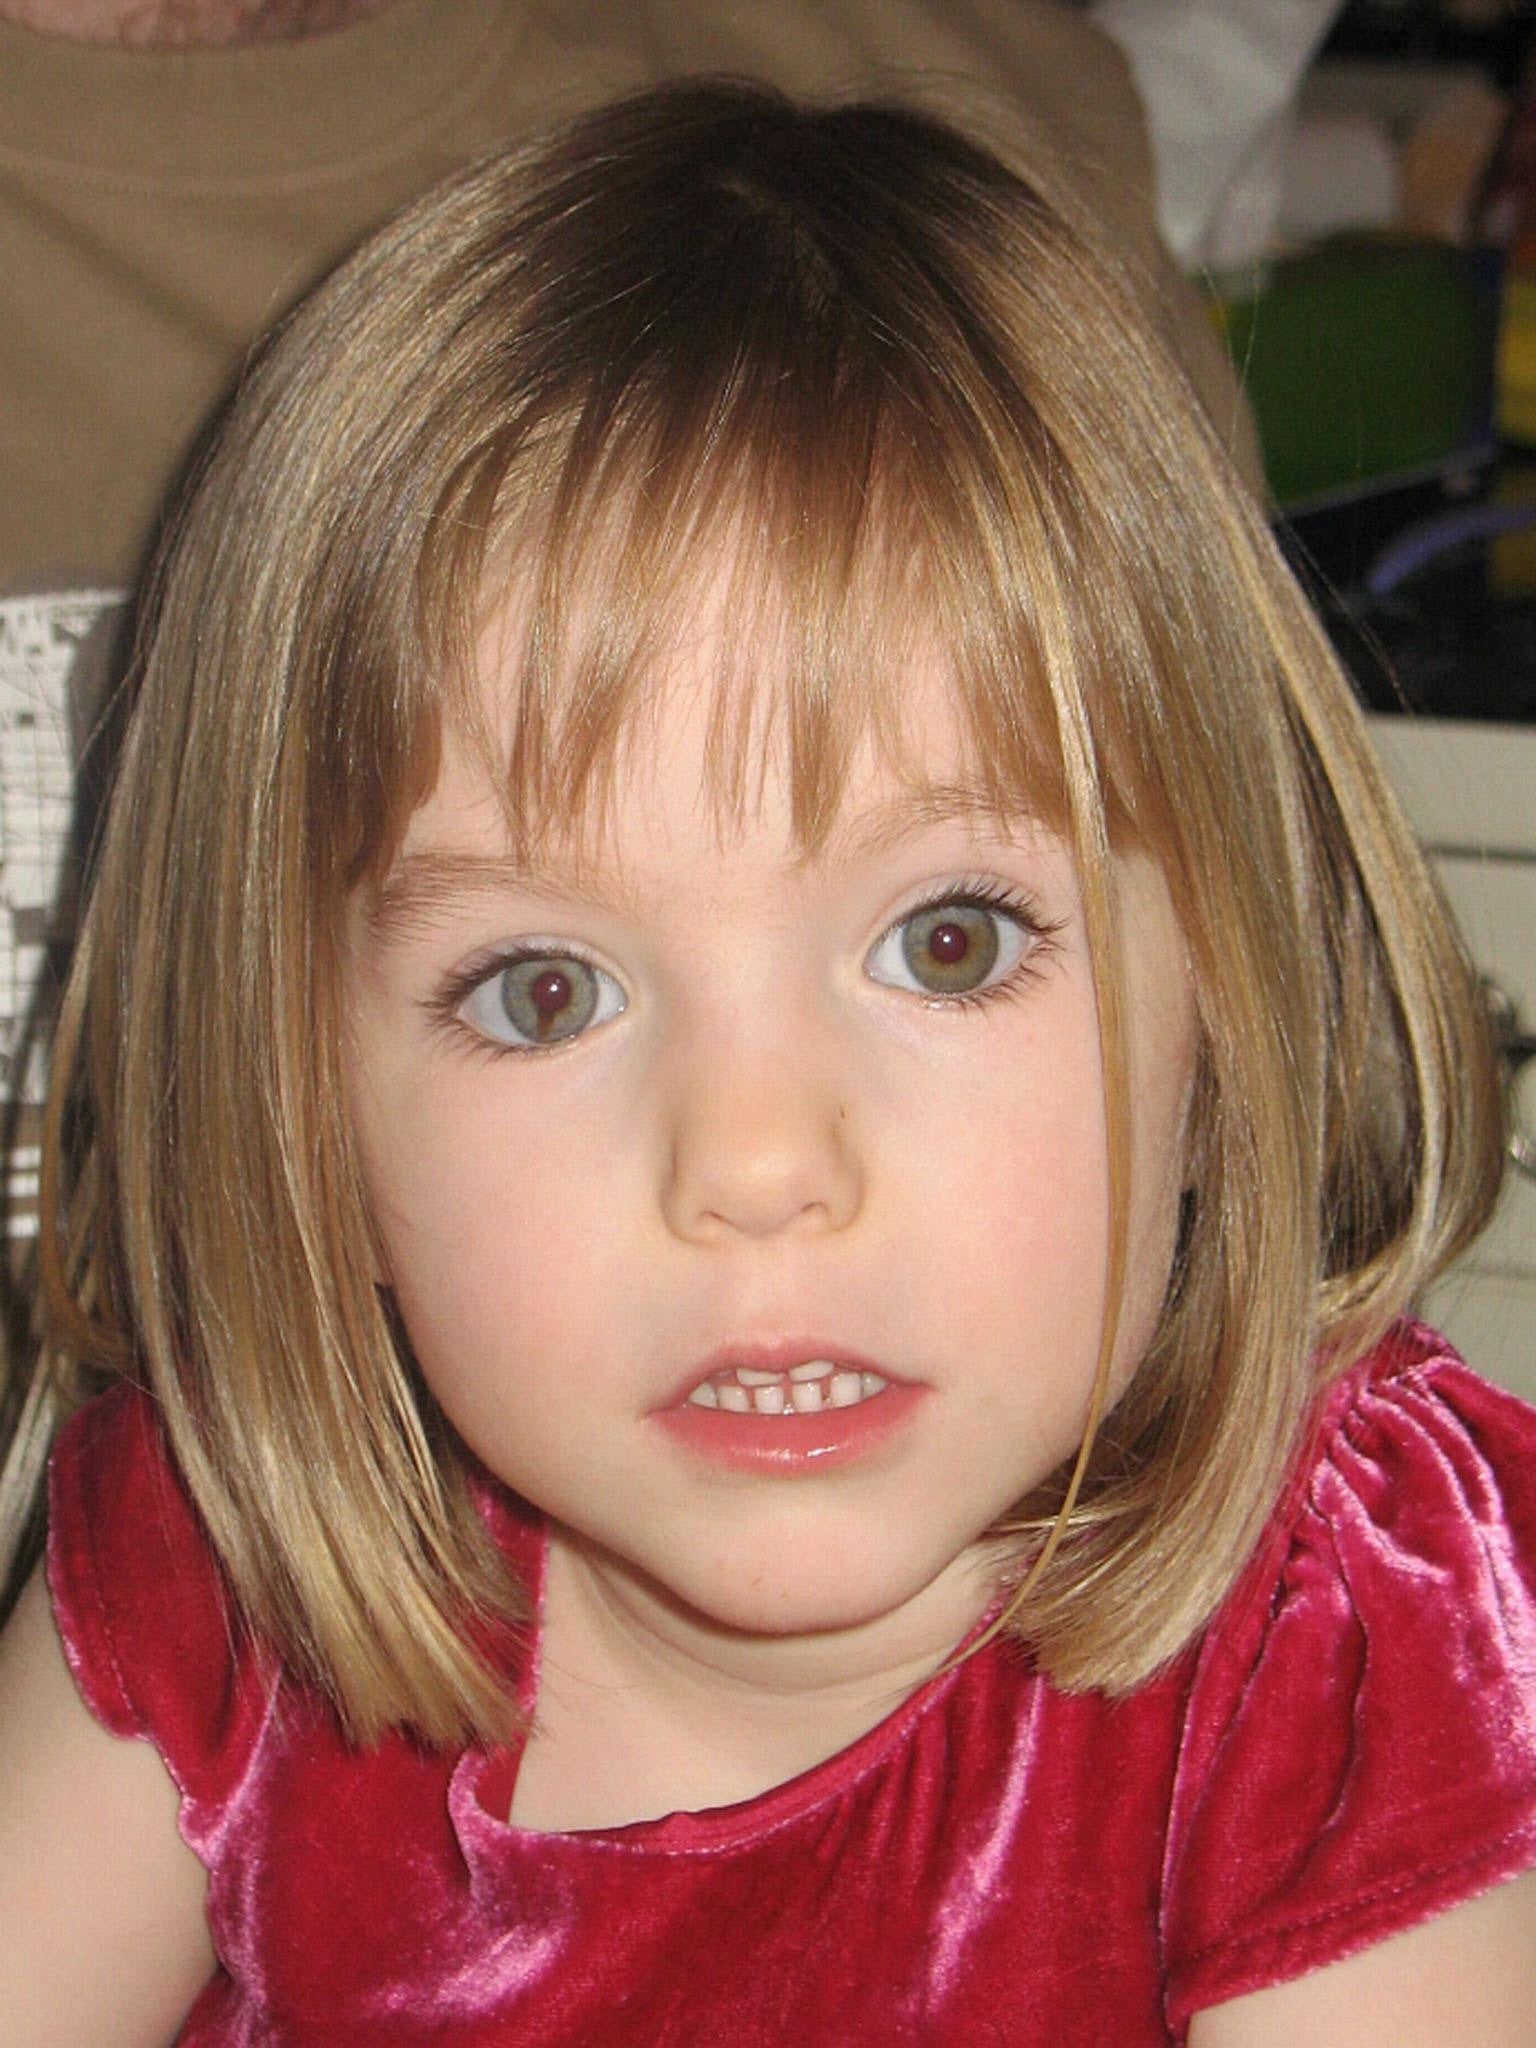 Madeleine vanished from her bedroom while on a family holiday in the resort of Praia da Luz in 2007